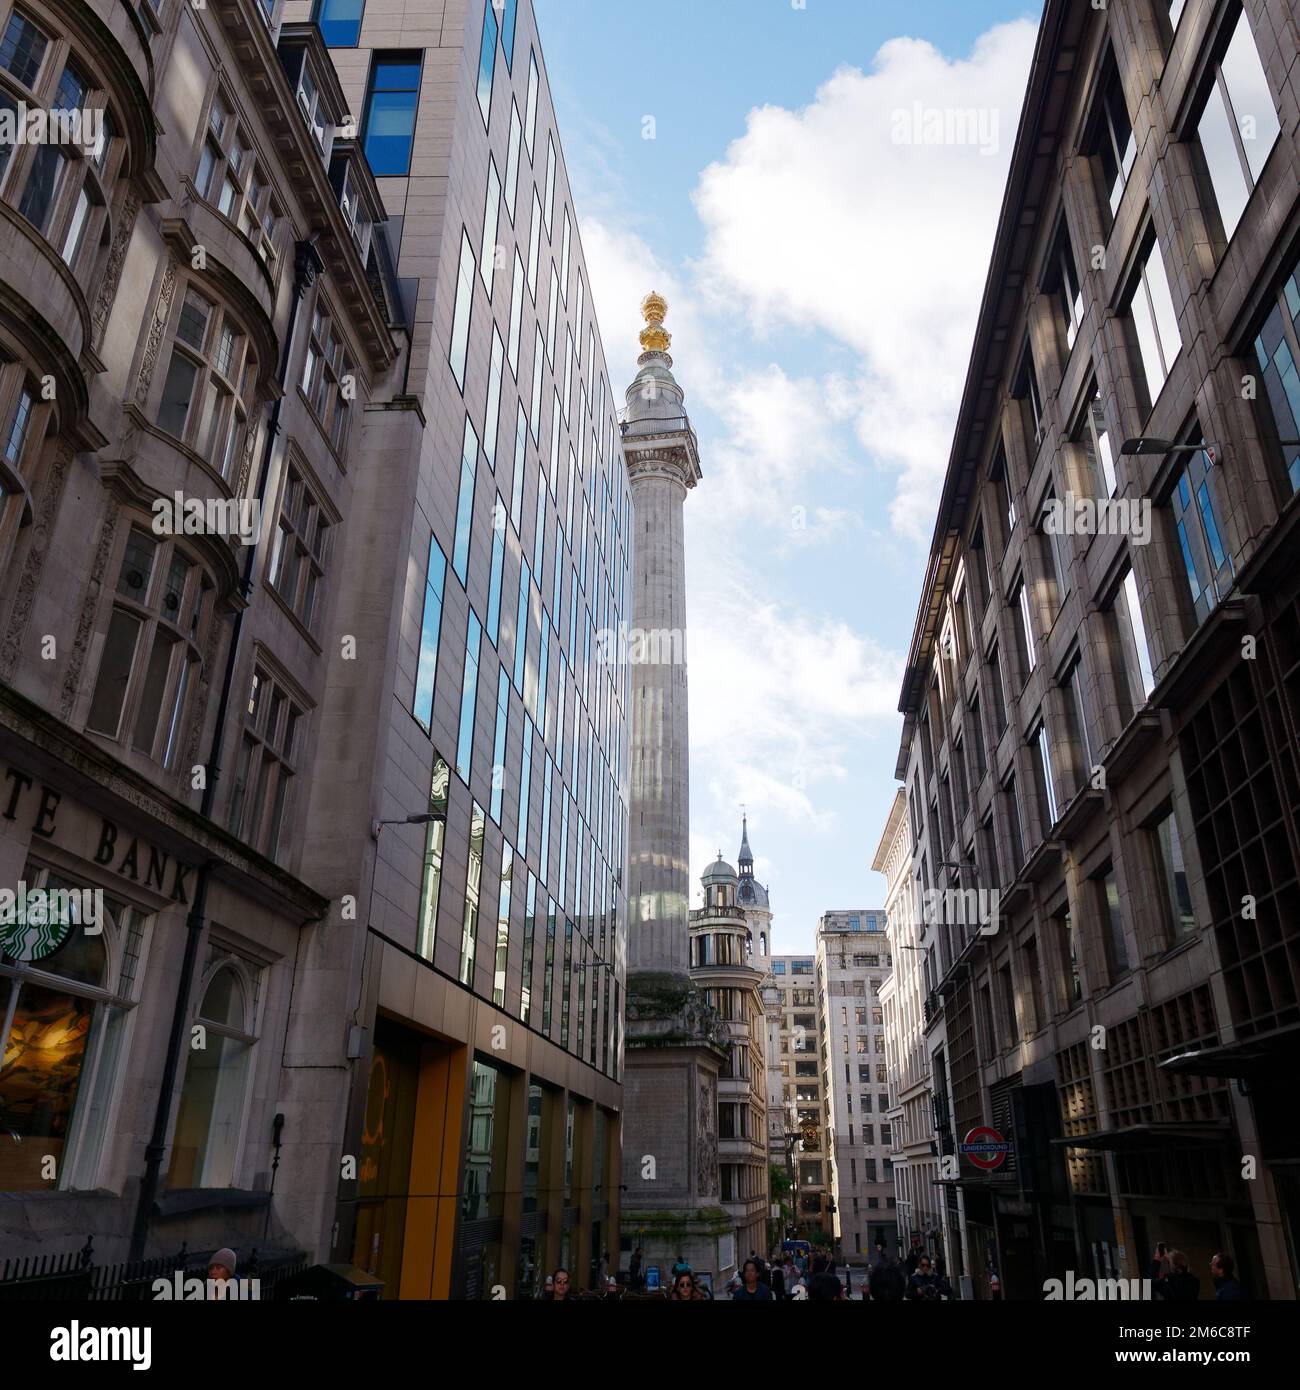 The Monument (To the Great Fire of London) in the City of London with surrounding architecture. Stock Photo